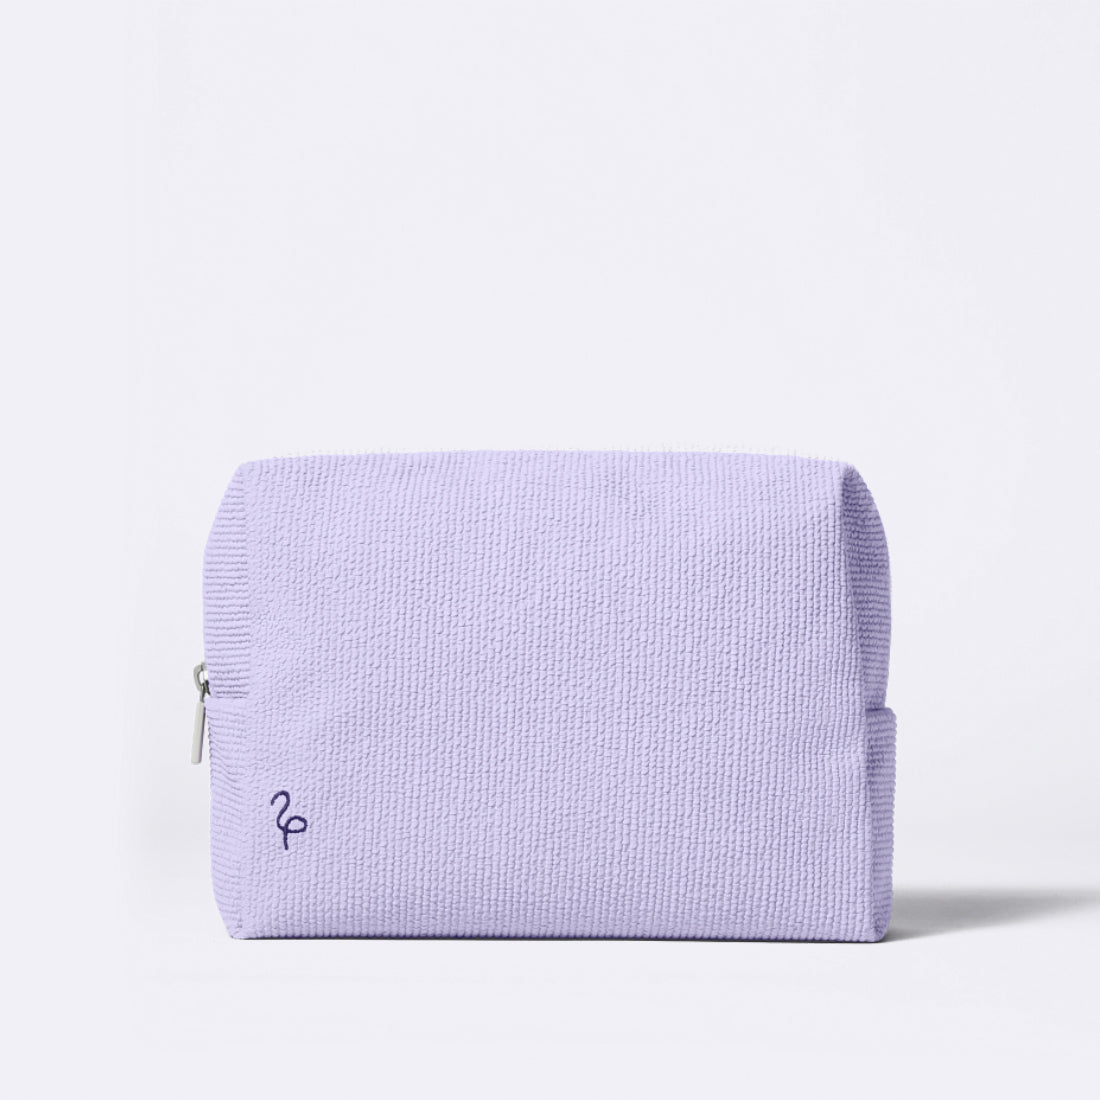 Lilac Flamingo Makeup Bag in a ribbed lilac cotton fabric with a small embroidered dark purple flamingo bird logo